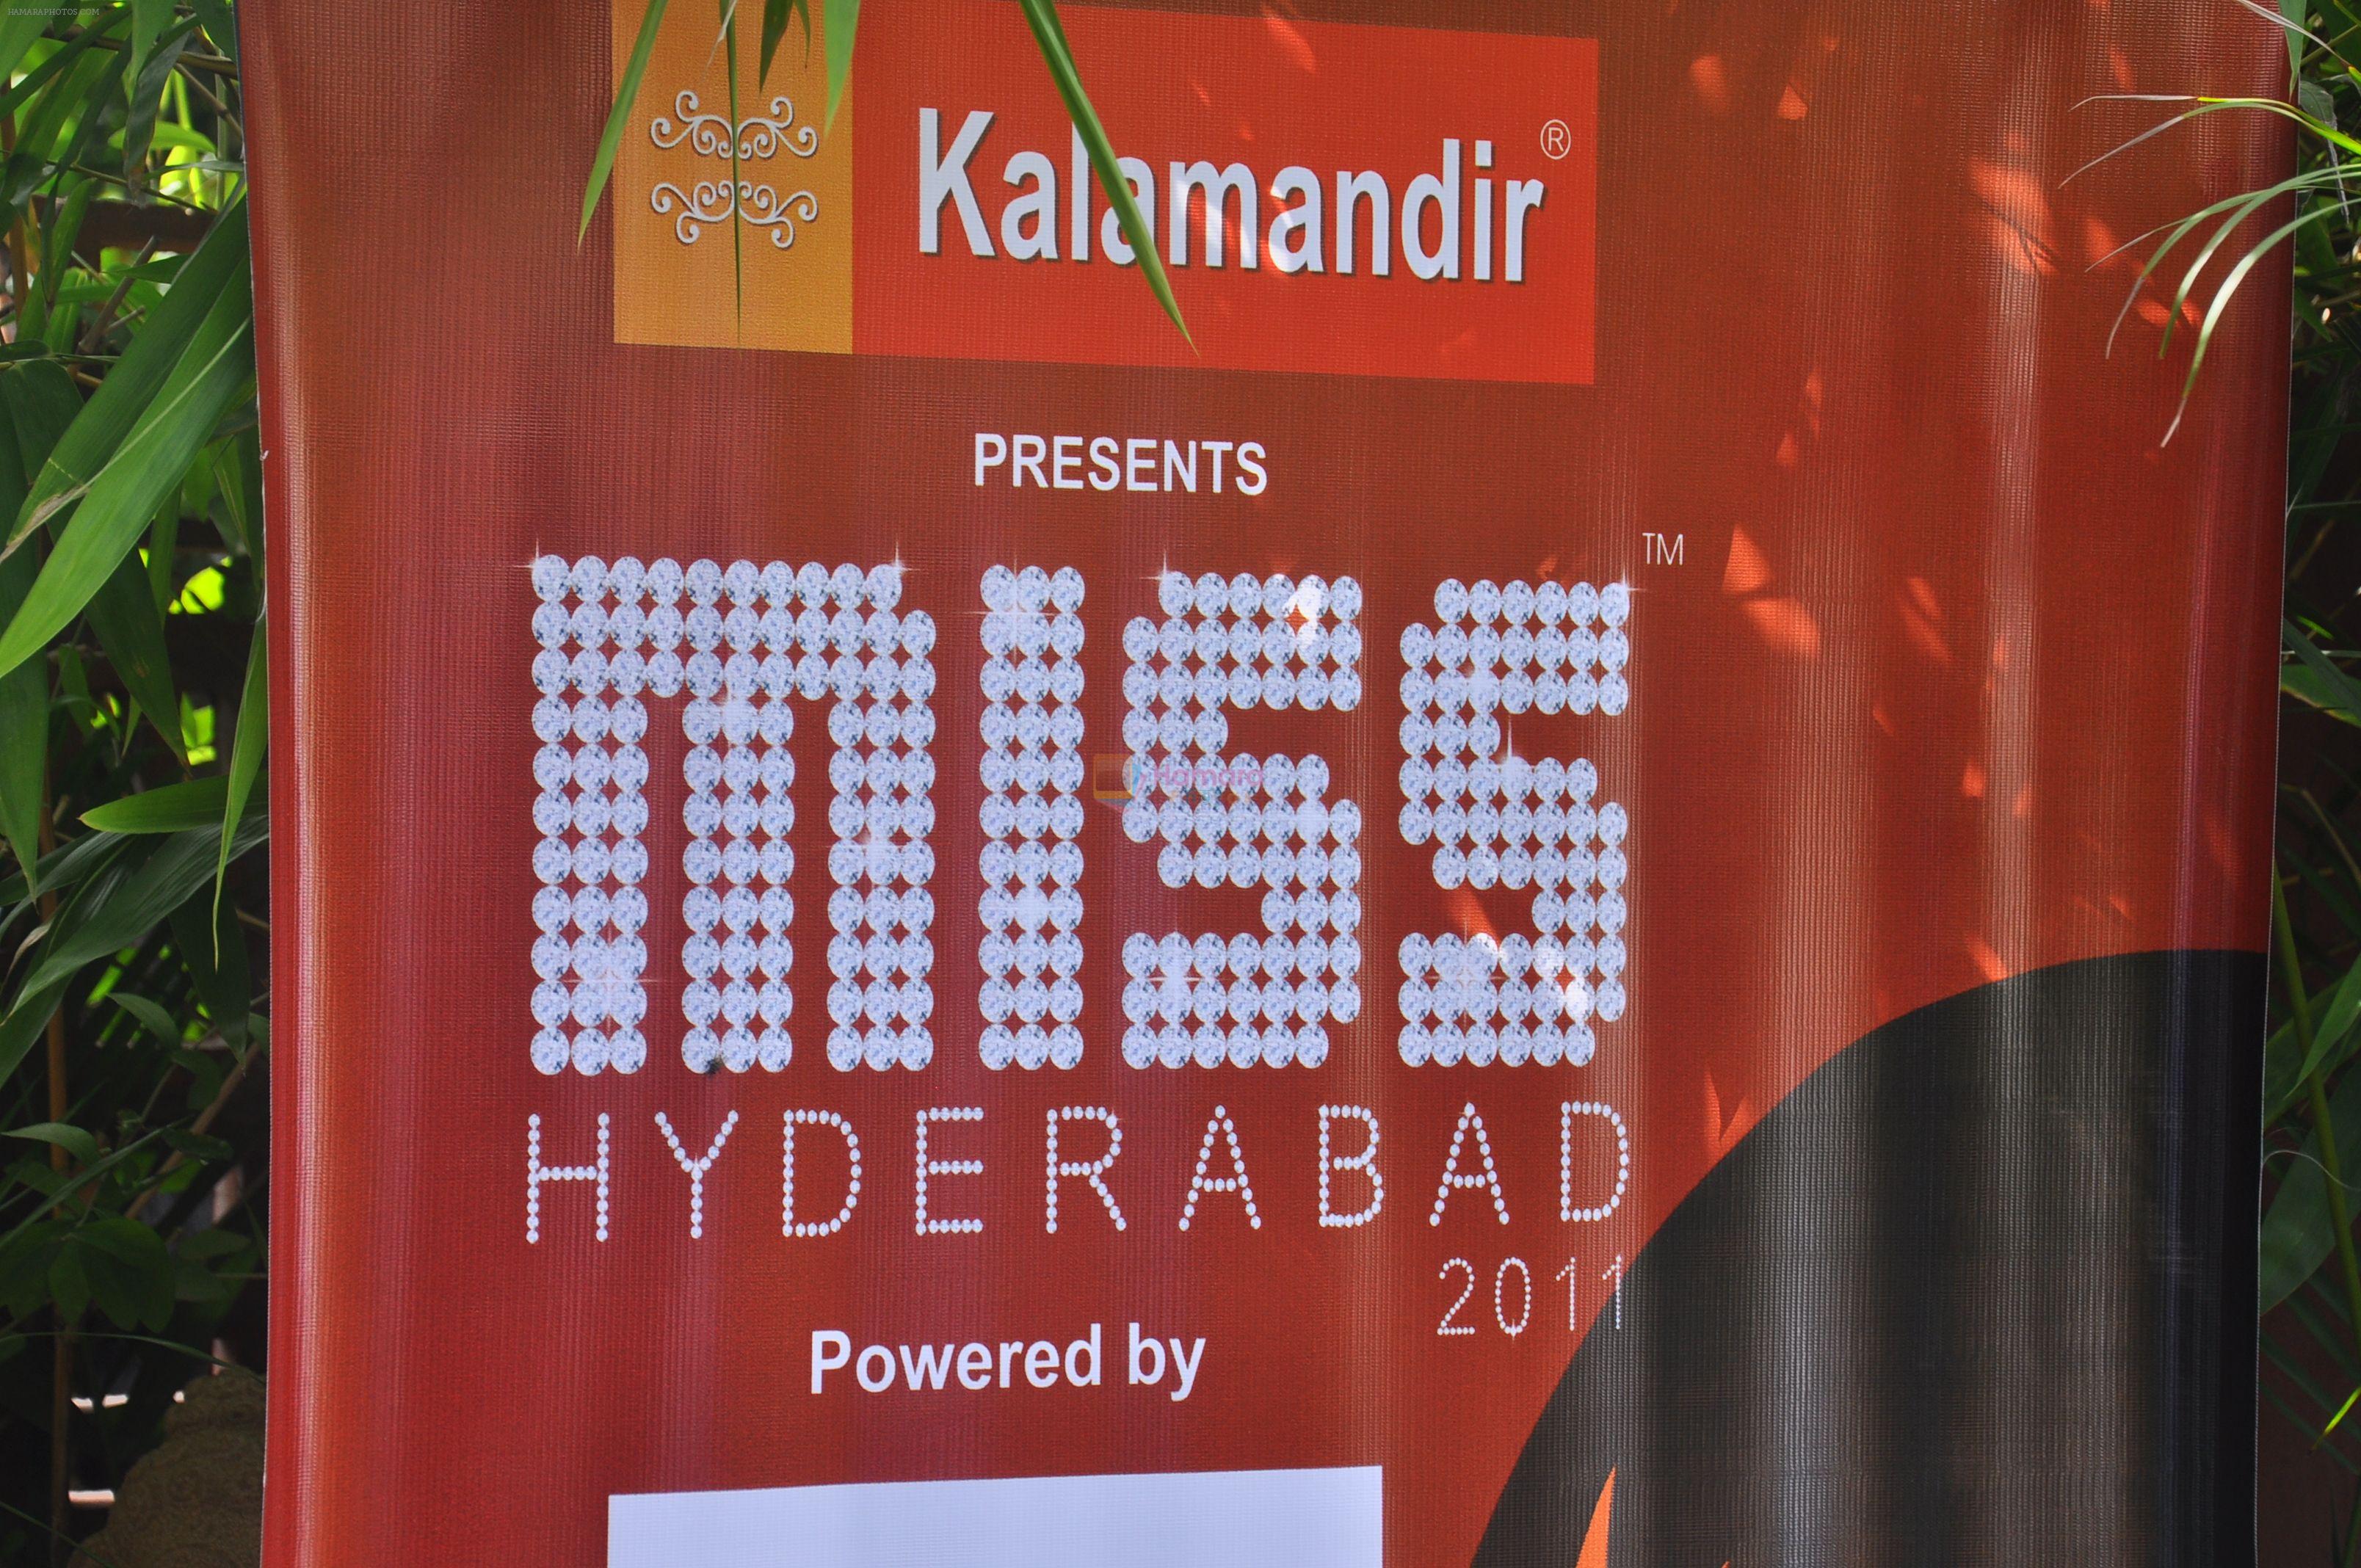 2011 Miss Hyderabad at Bottles and Chimney on 17th September 2011